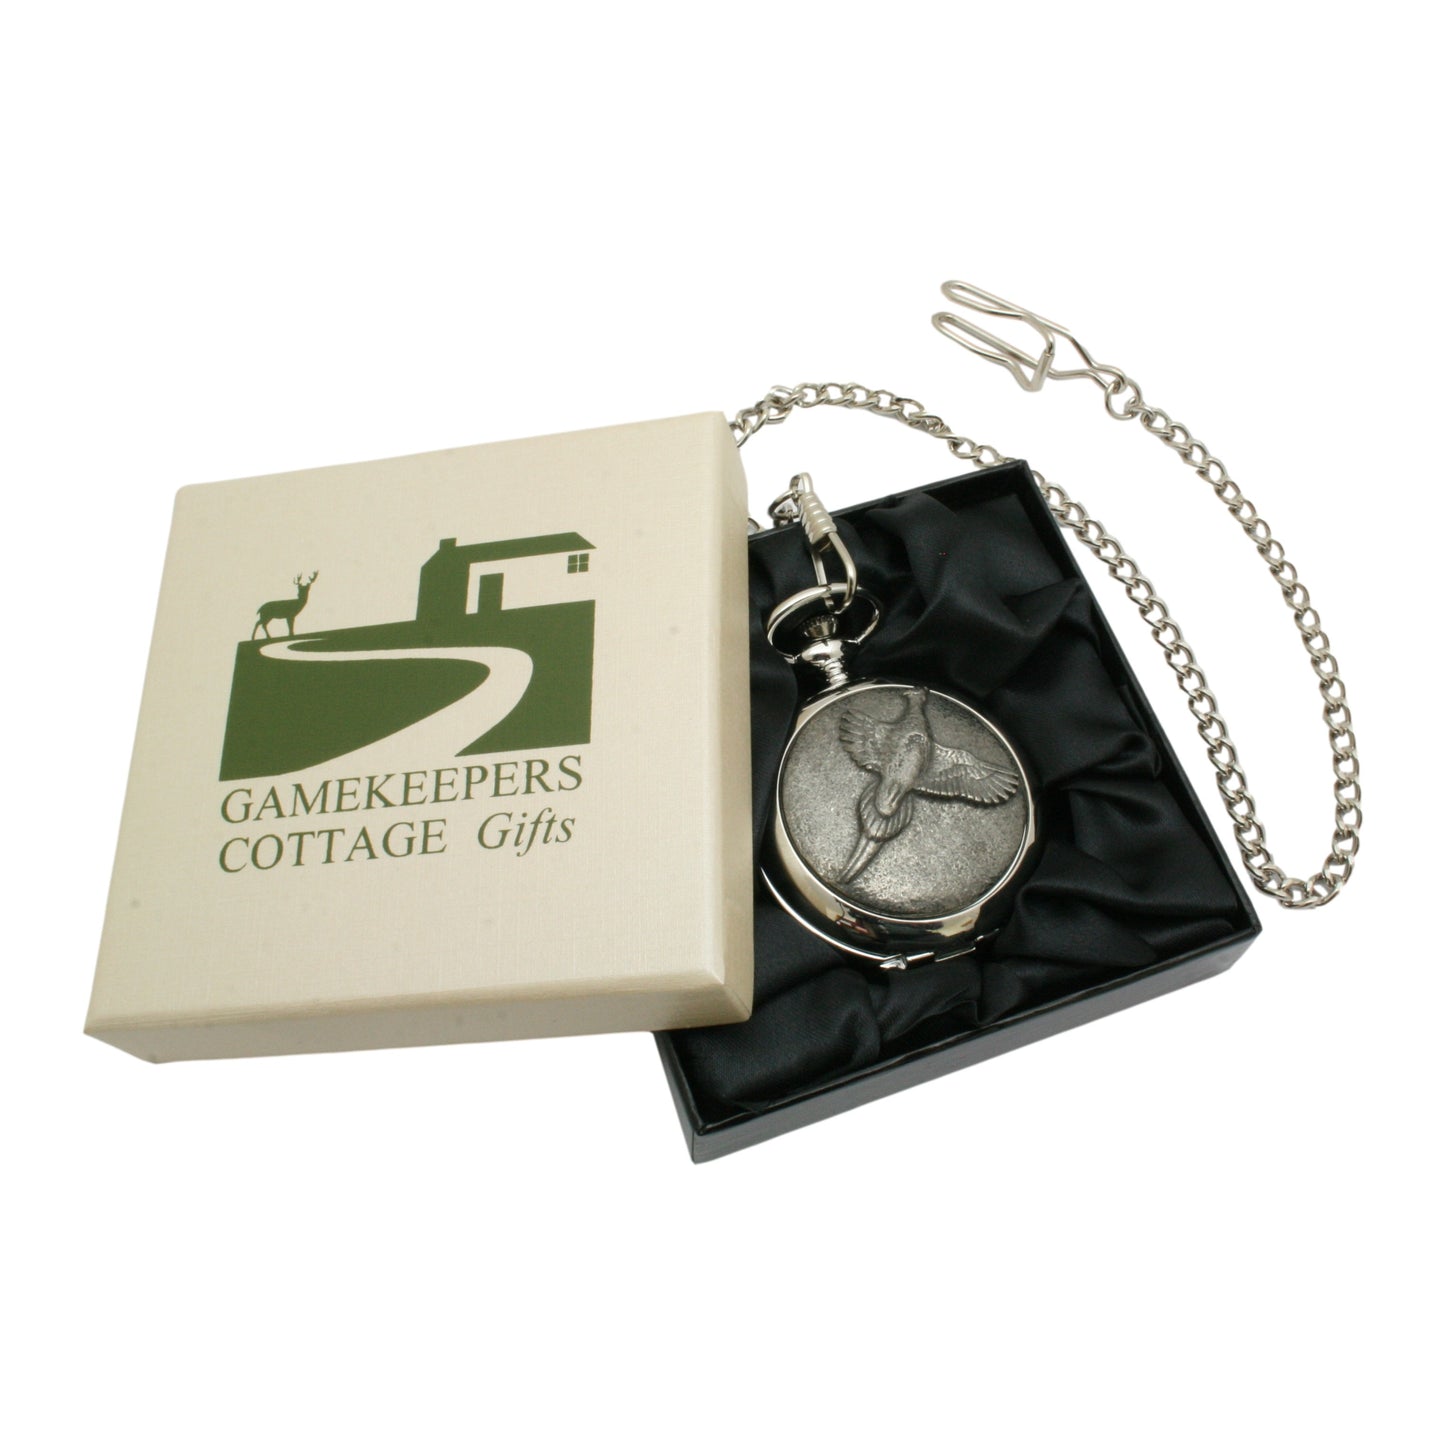 Pheasant Pocket Watch Hand Cast Pewter Fronted Presentation Box